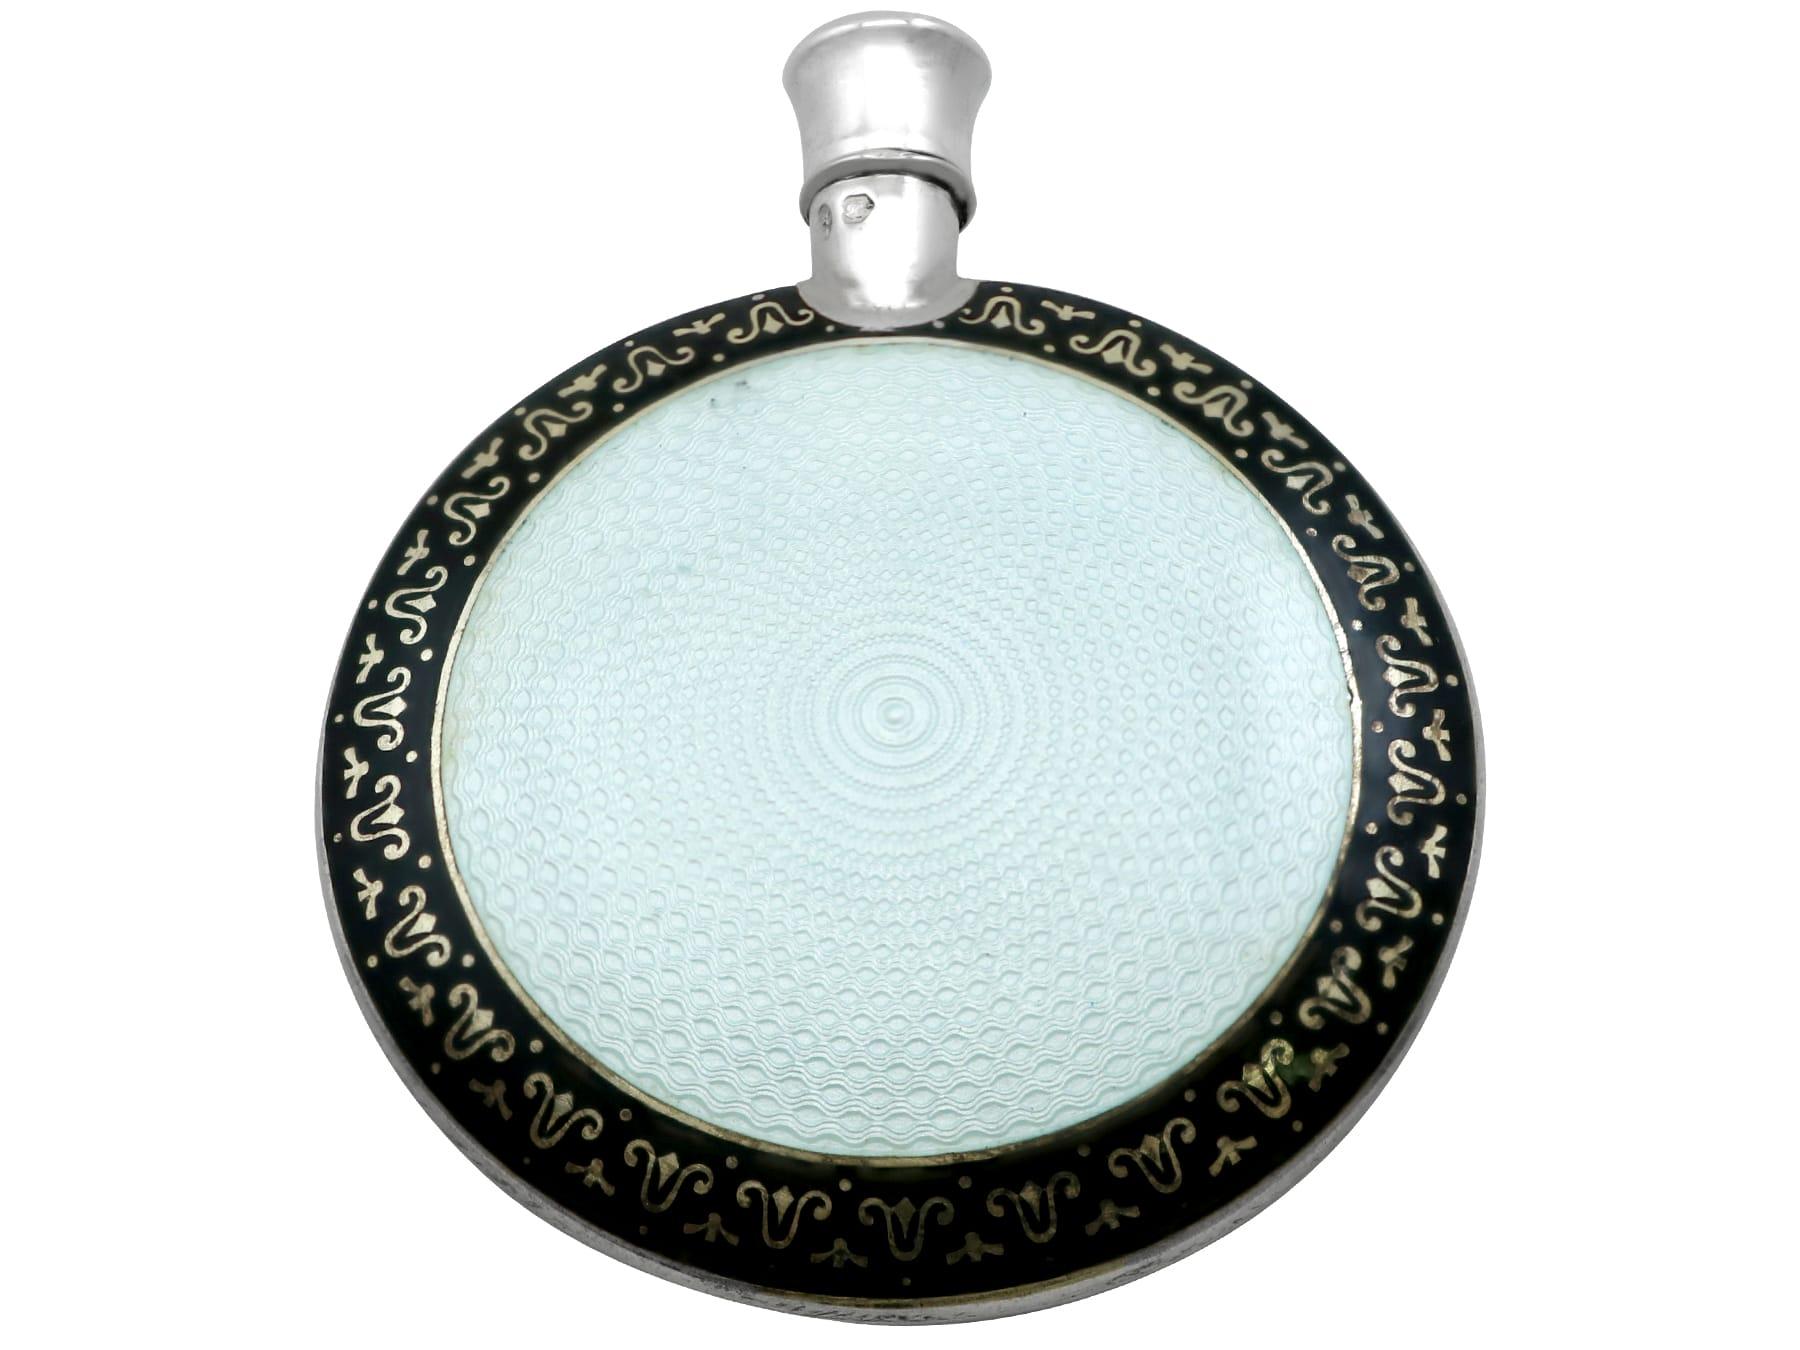 An exceptional, fine and impressive antique French import sterling silver and enamel combination scent bottle and compact with mirror; an addition to our ornamental silverware collection

This exceptional antique enamel and sterling silver gilt